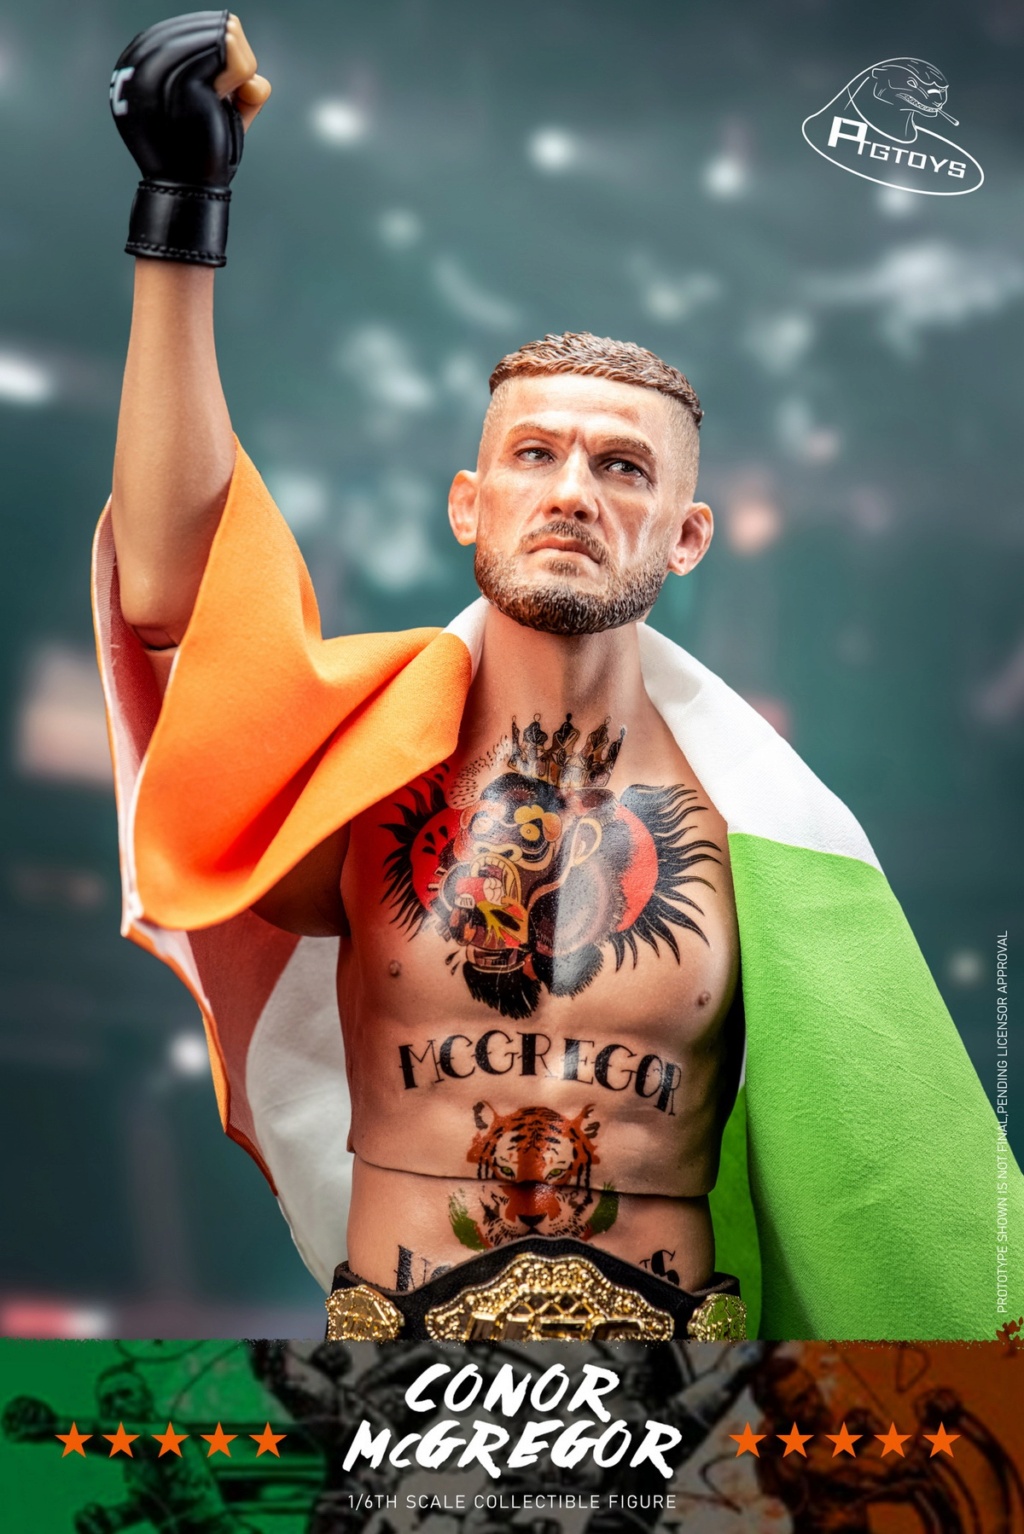 NEW PRODUCT: PTGToys: 1/6 Conor MCGREGOR Action Figure  16551411